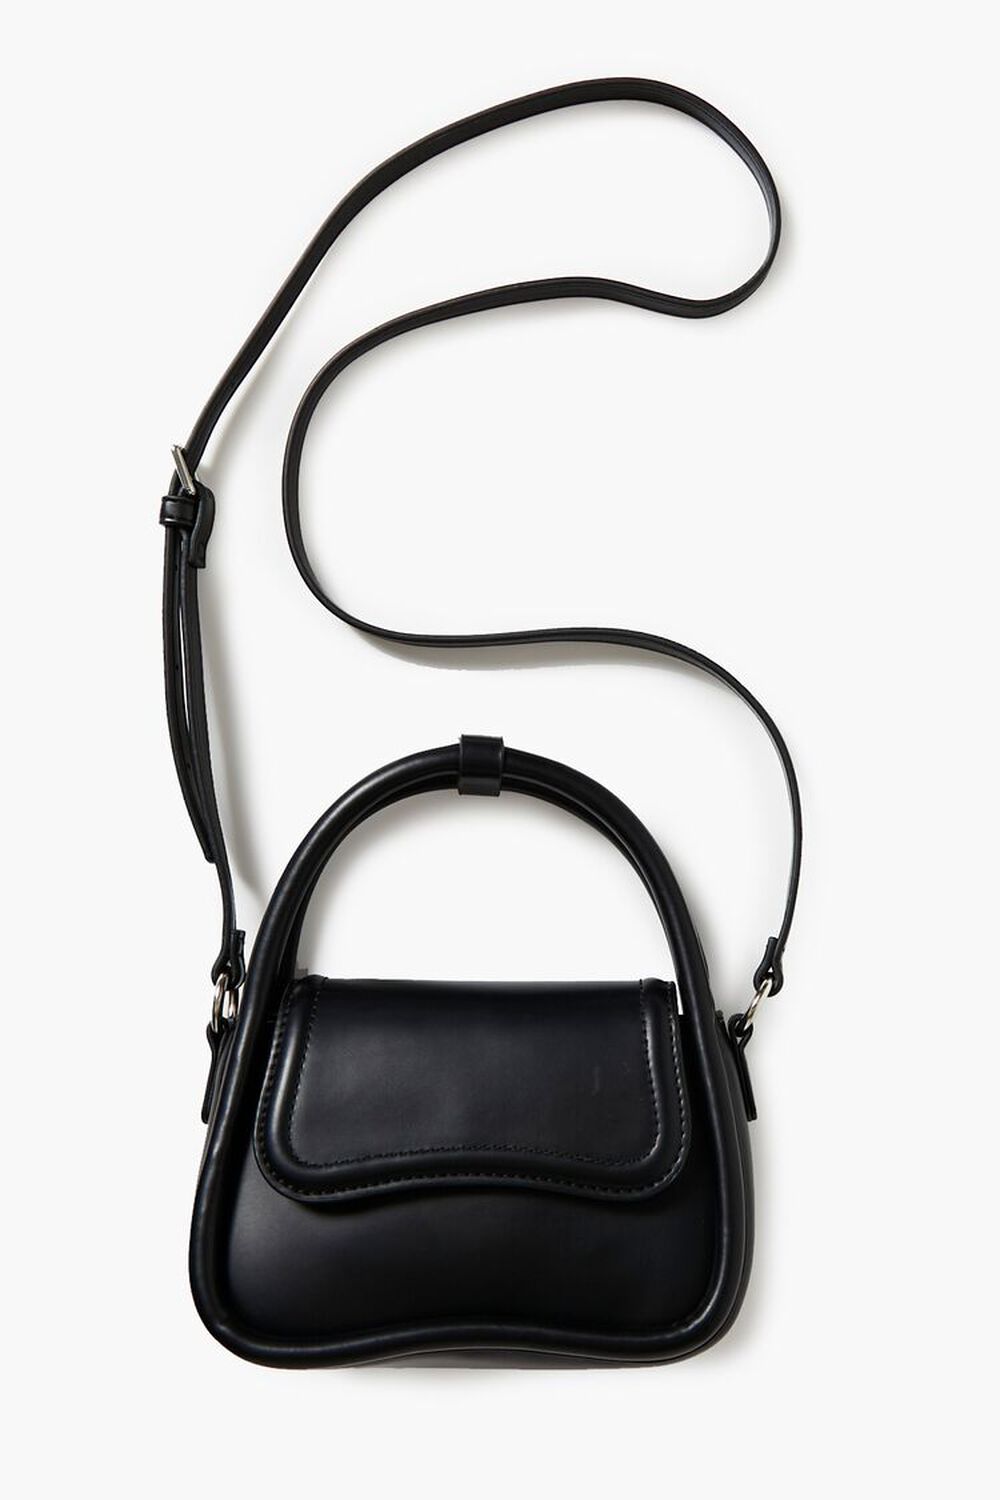 Forever 21 Women's Faux Patent Leather/Pleather Crossbody Bag in Black | F21